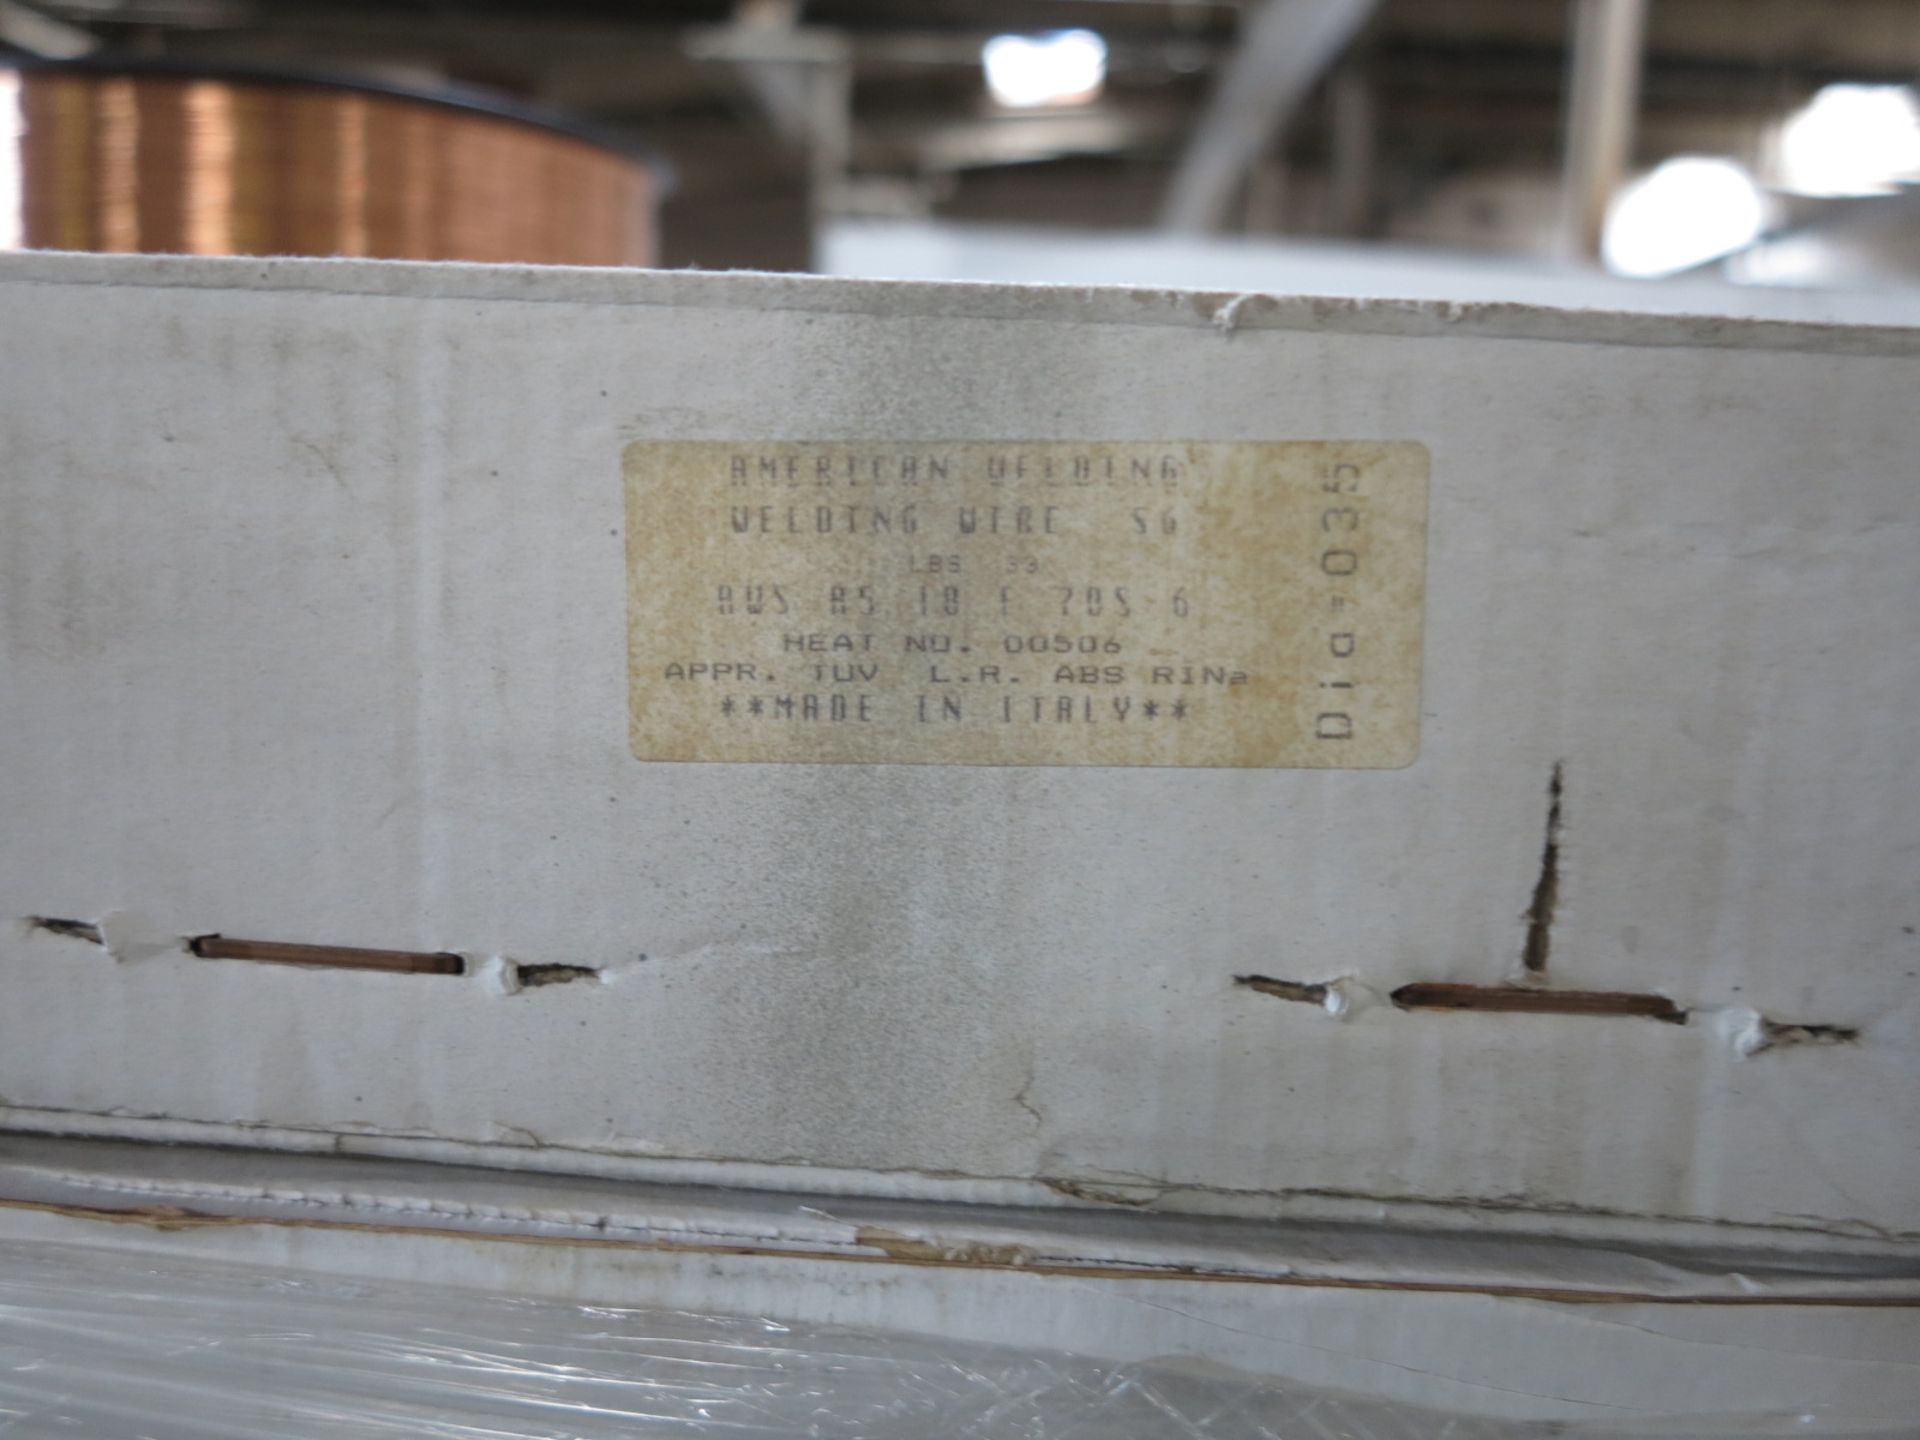 LOT - PALLET OF AMERICAN WELDING WIRE, S6, DIA. .035", 81 BOXES - Image 2 of 2